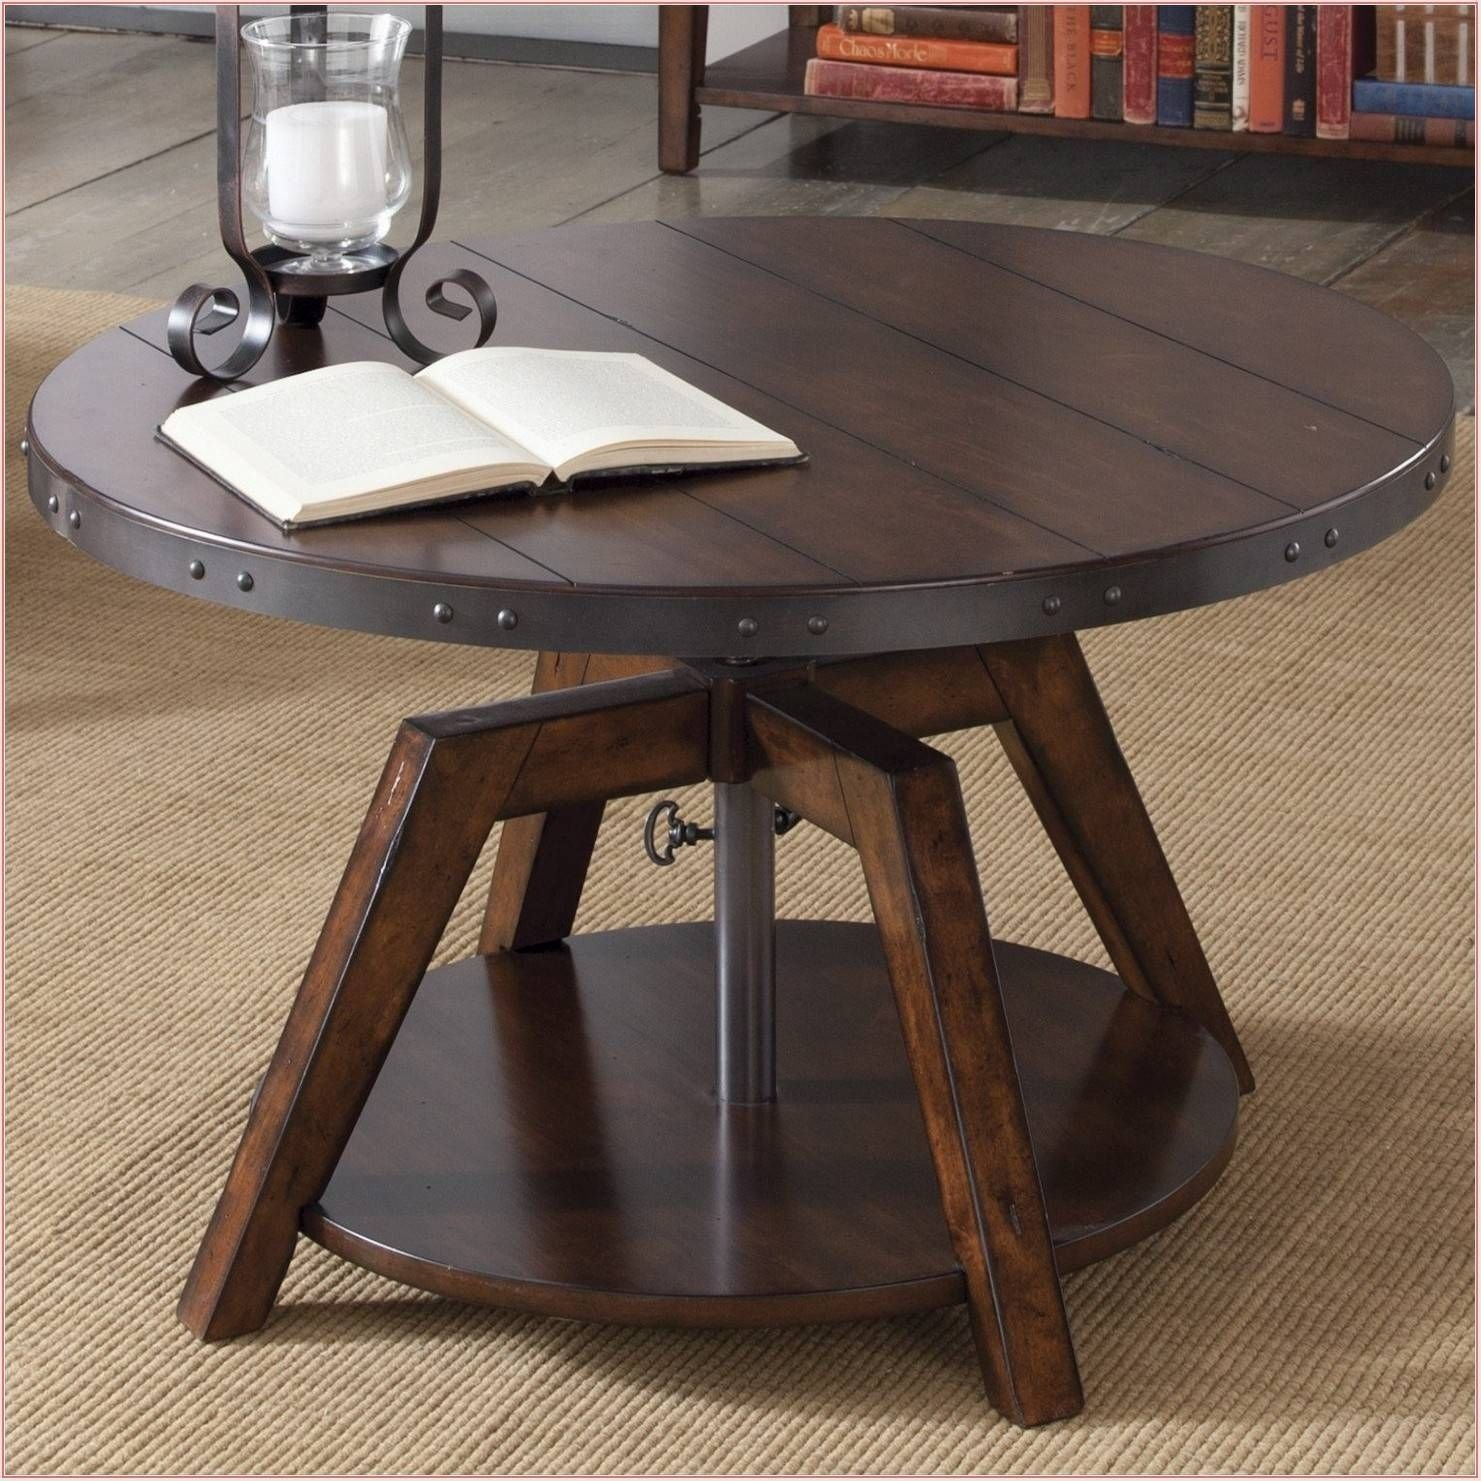 50 Amazing Convertible Coffee Table To Dining Table Up To 70 Off throughout proportions 1481 X 1481